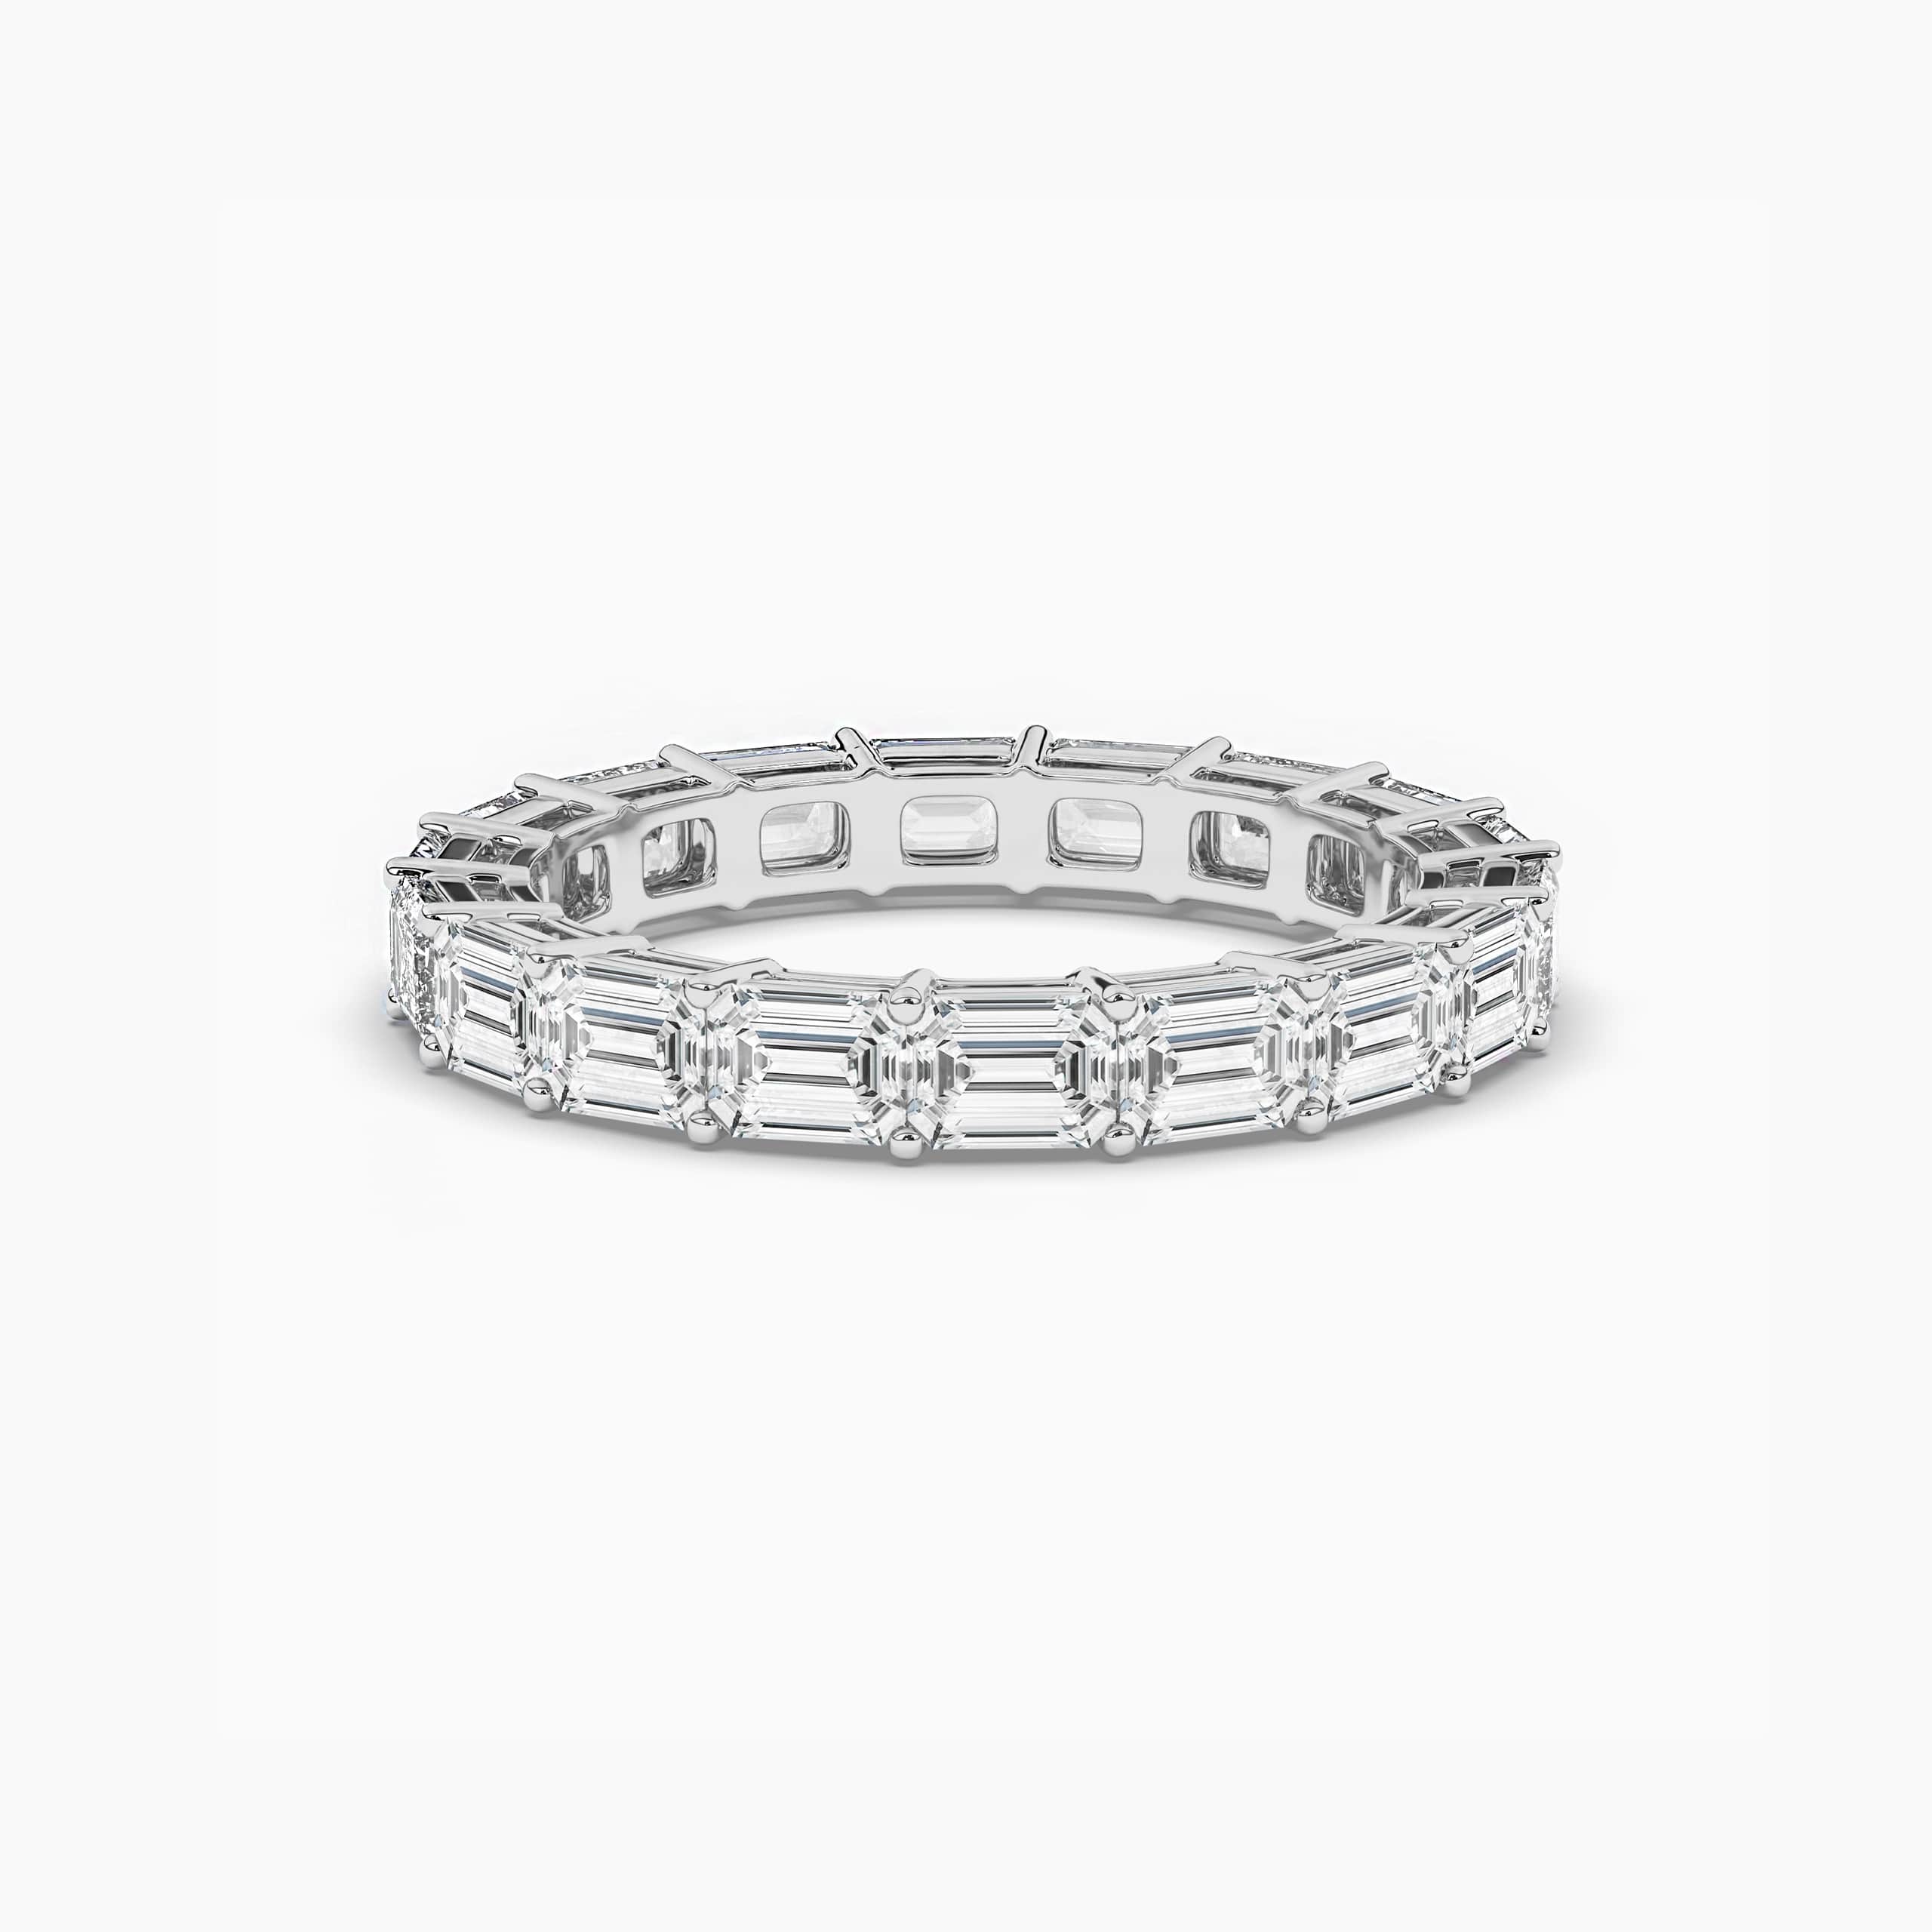 East To West Emerald Cut Diamond Eternity Ring In White Gold